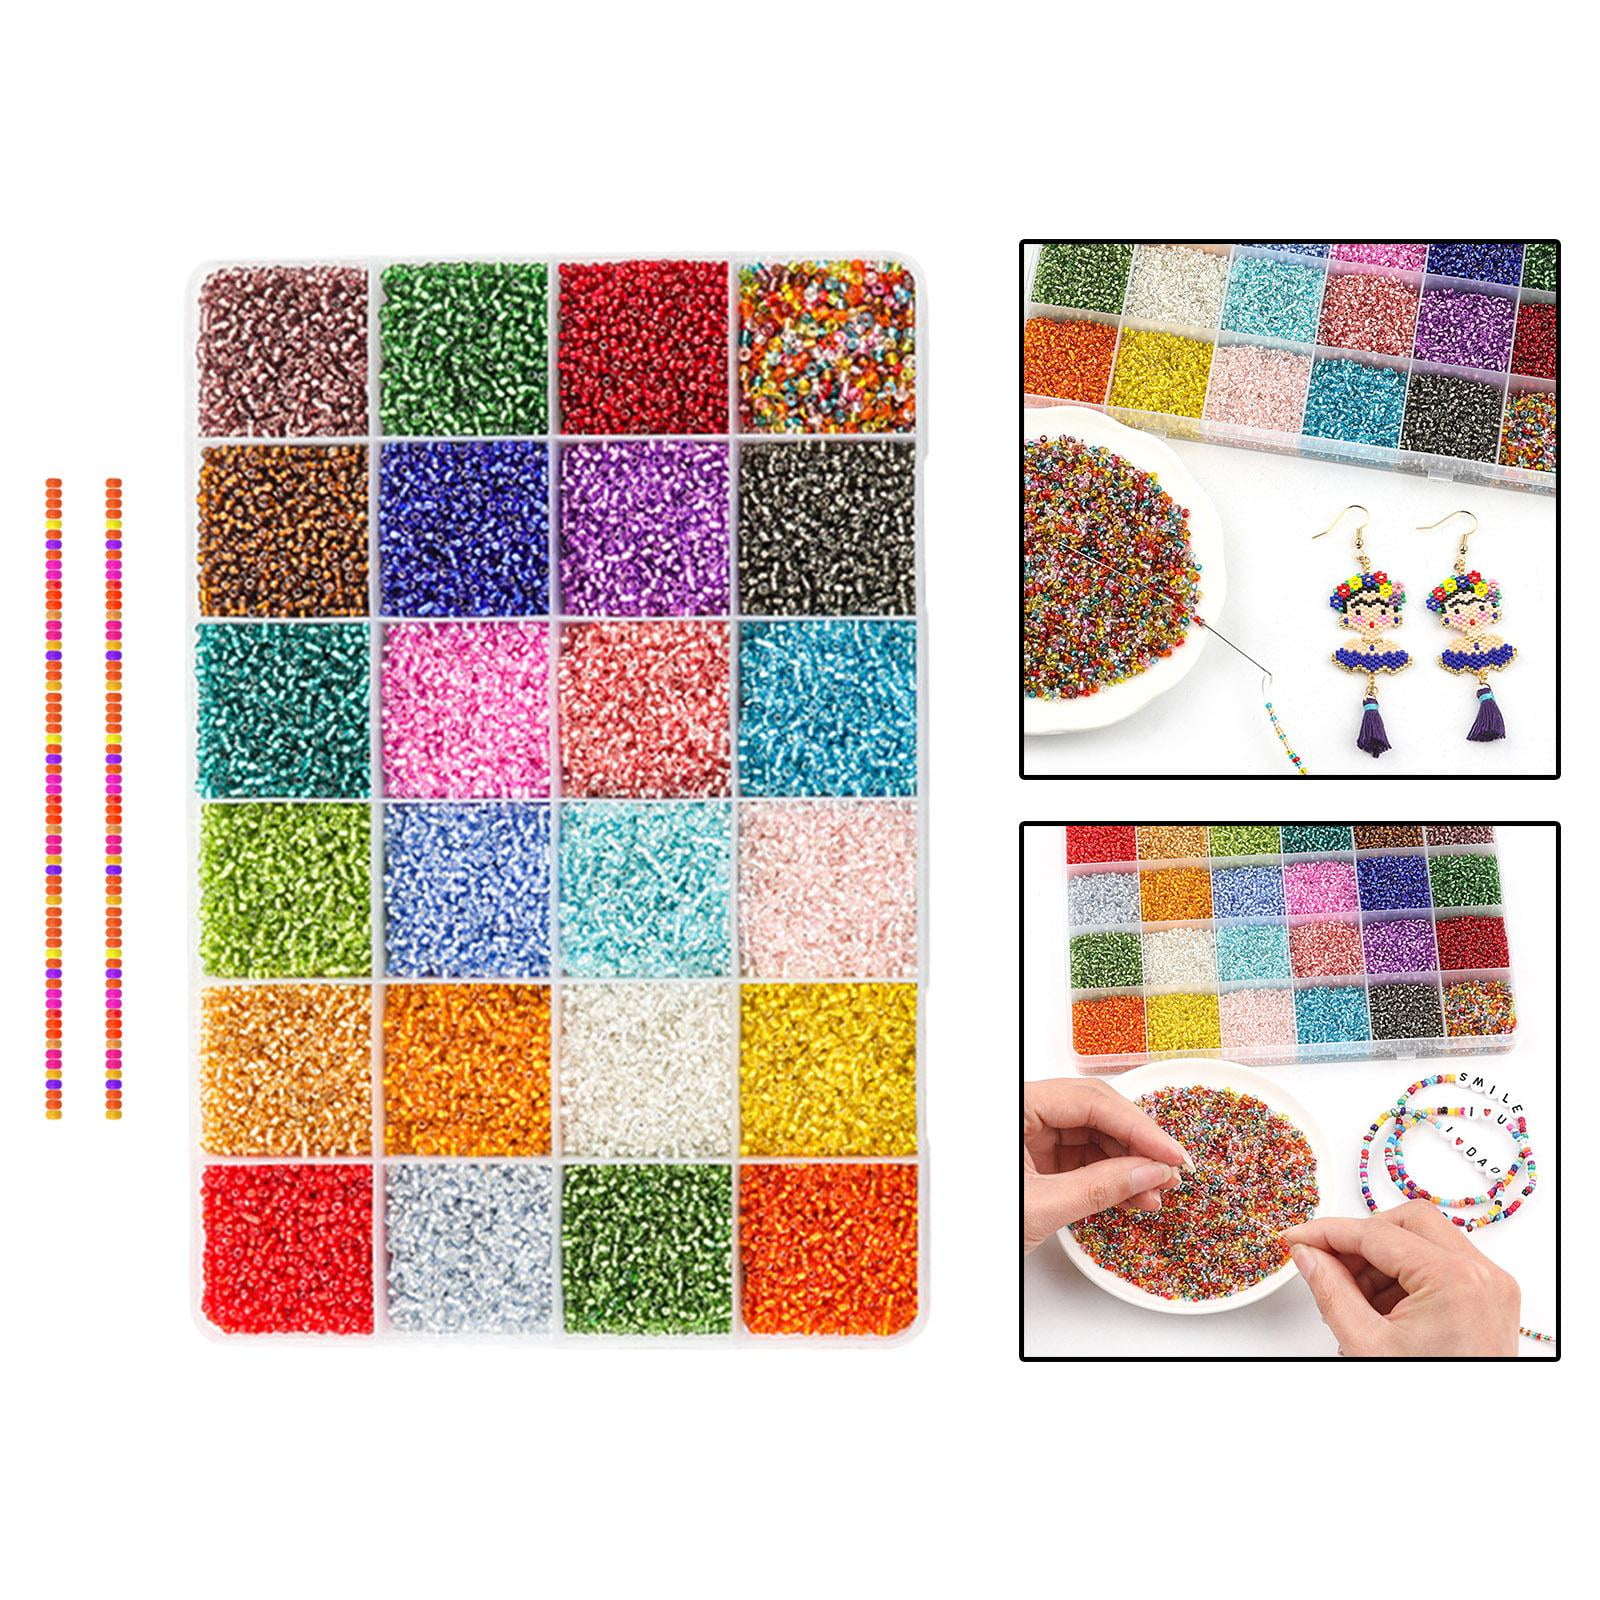 35500 pcs 2mm Glass Seed Beads for Jewelry Making, Indonesia